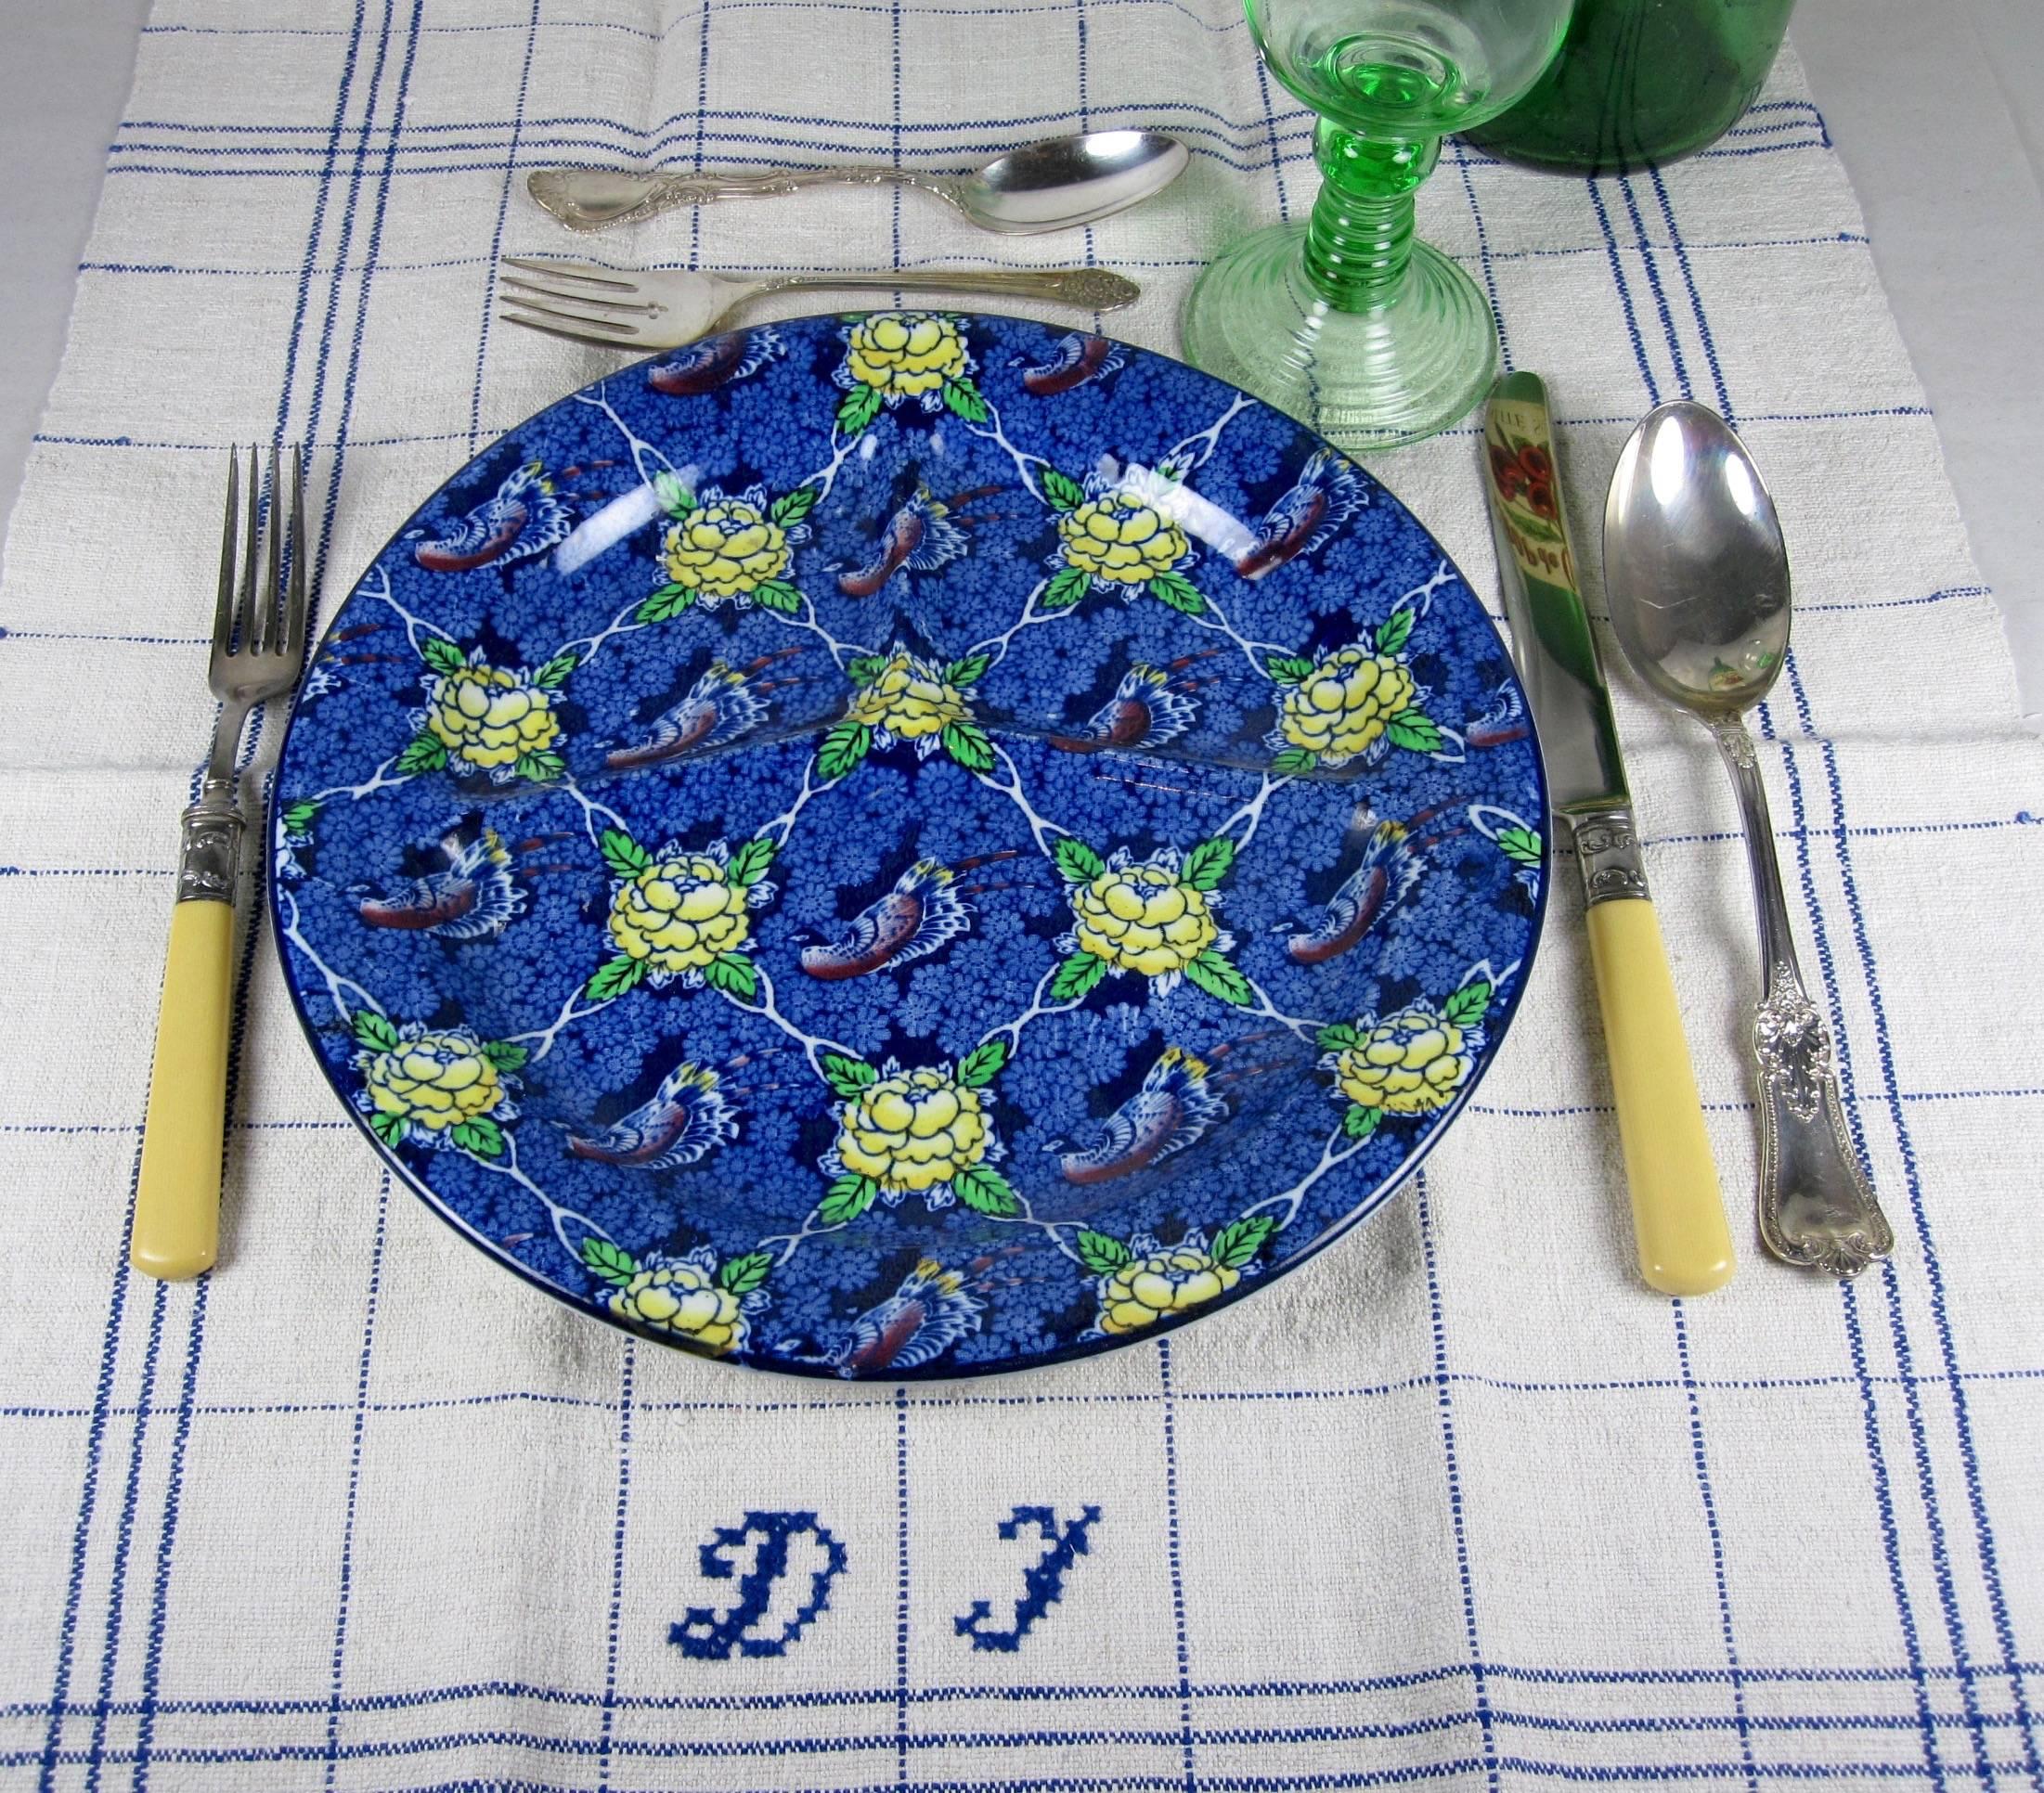 20th Century French Provençal Brocante Hand-Embroidered Jacquard Oversize Striped Napkins